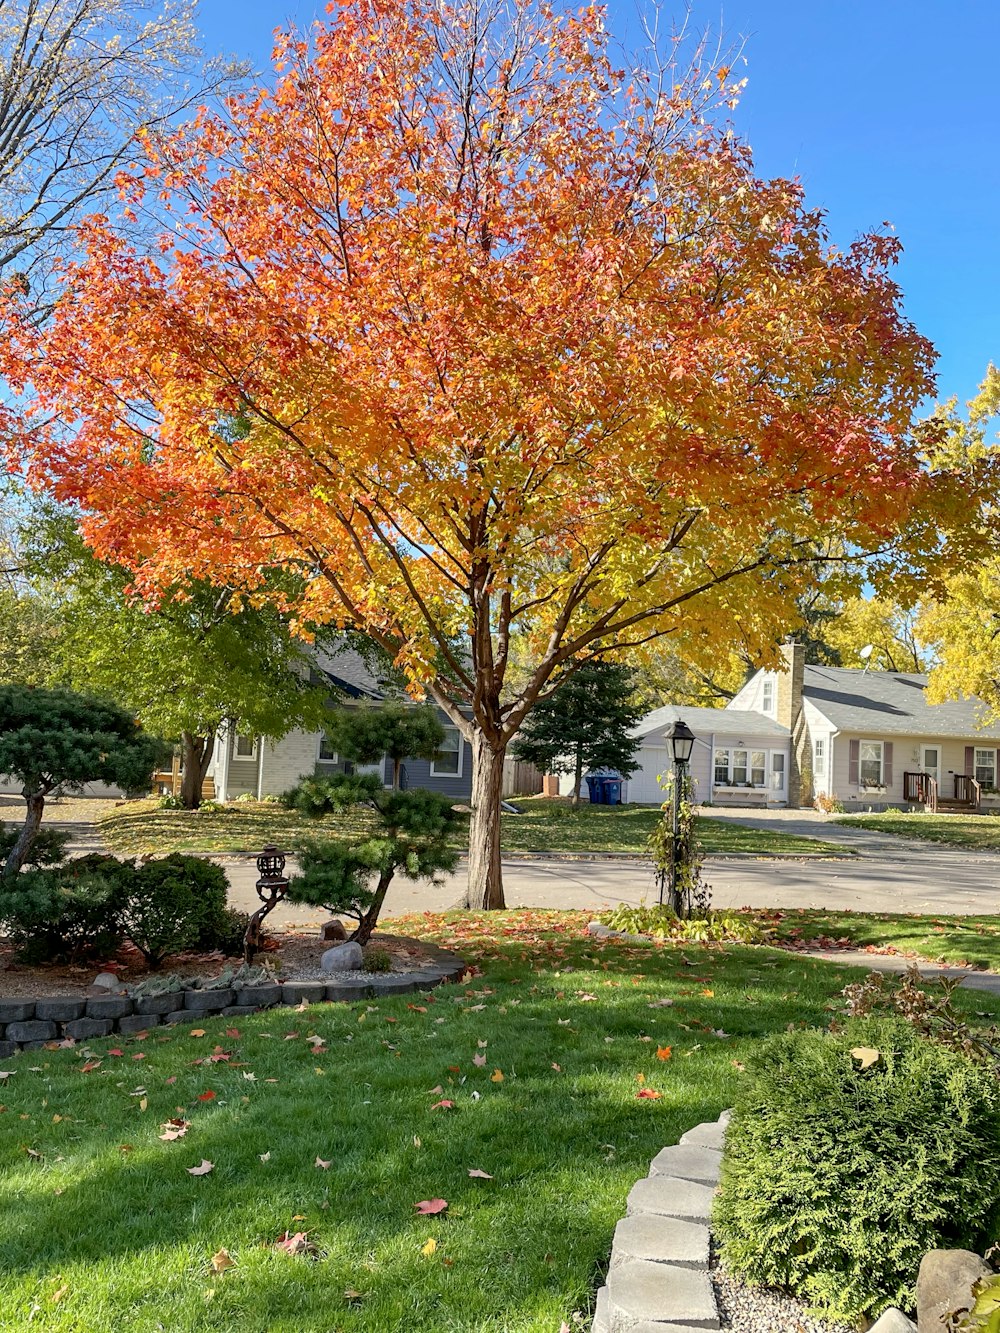 a tree with orange and yellow leaves in a yard